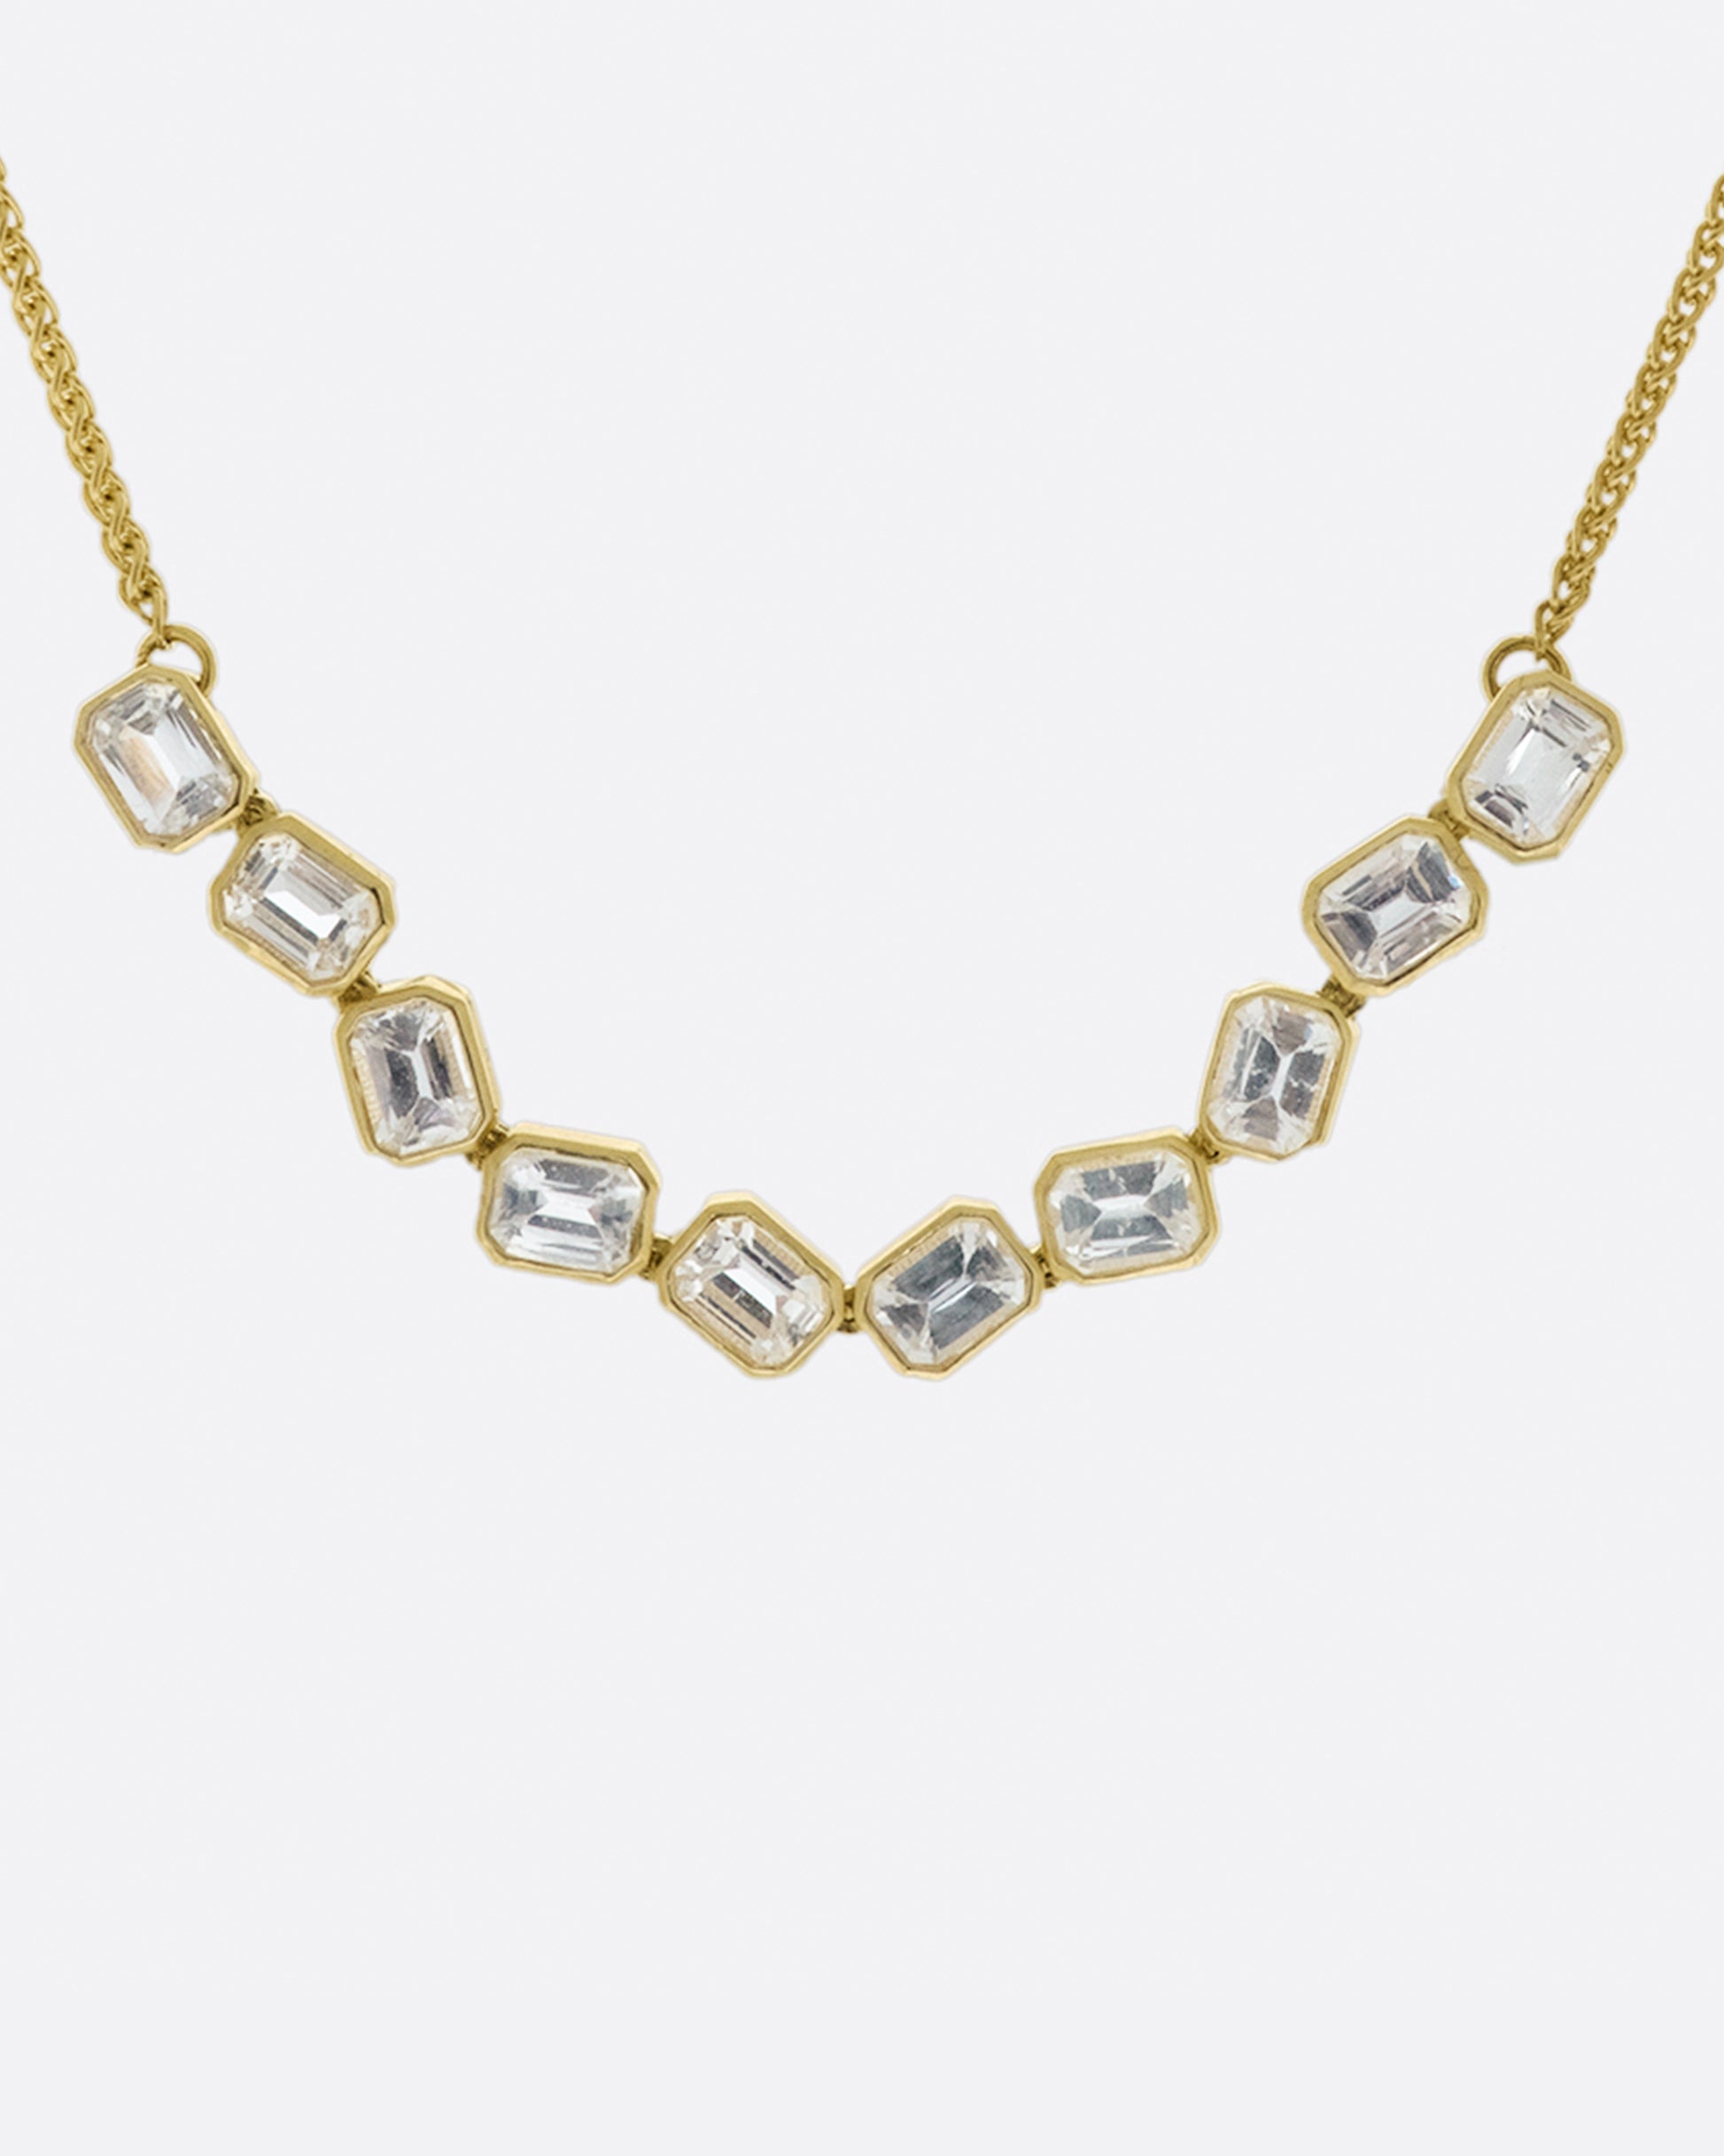 A chain necklace with a section of ten bezel set, emerald cut, white sapphires each connected to its neighbor by a hinge so the whole piece moves fluidly.